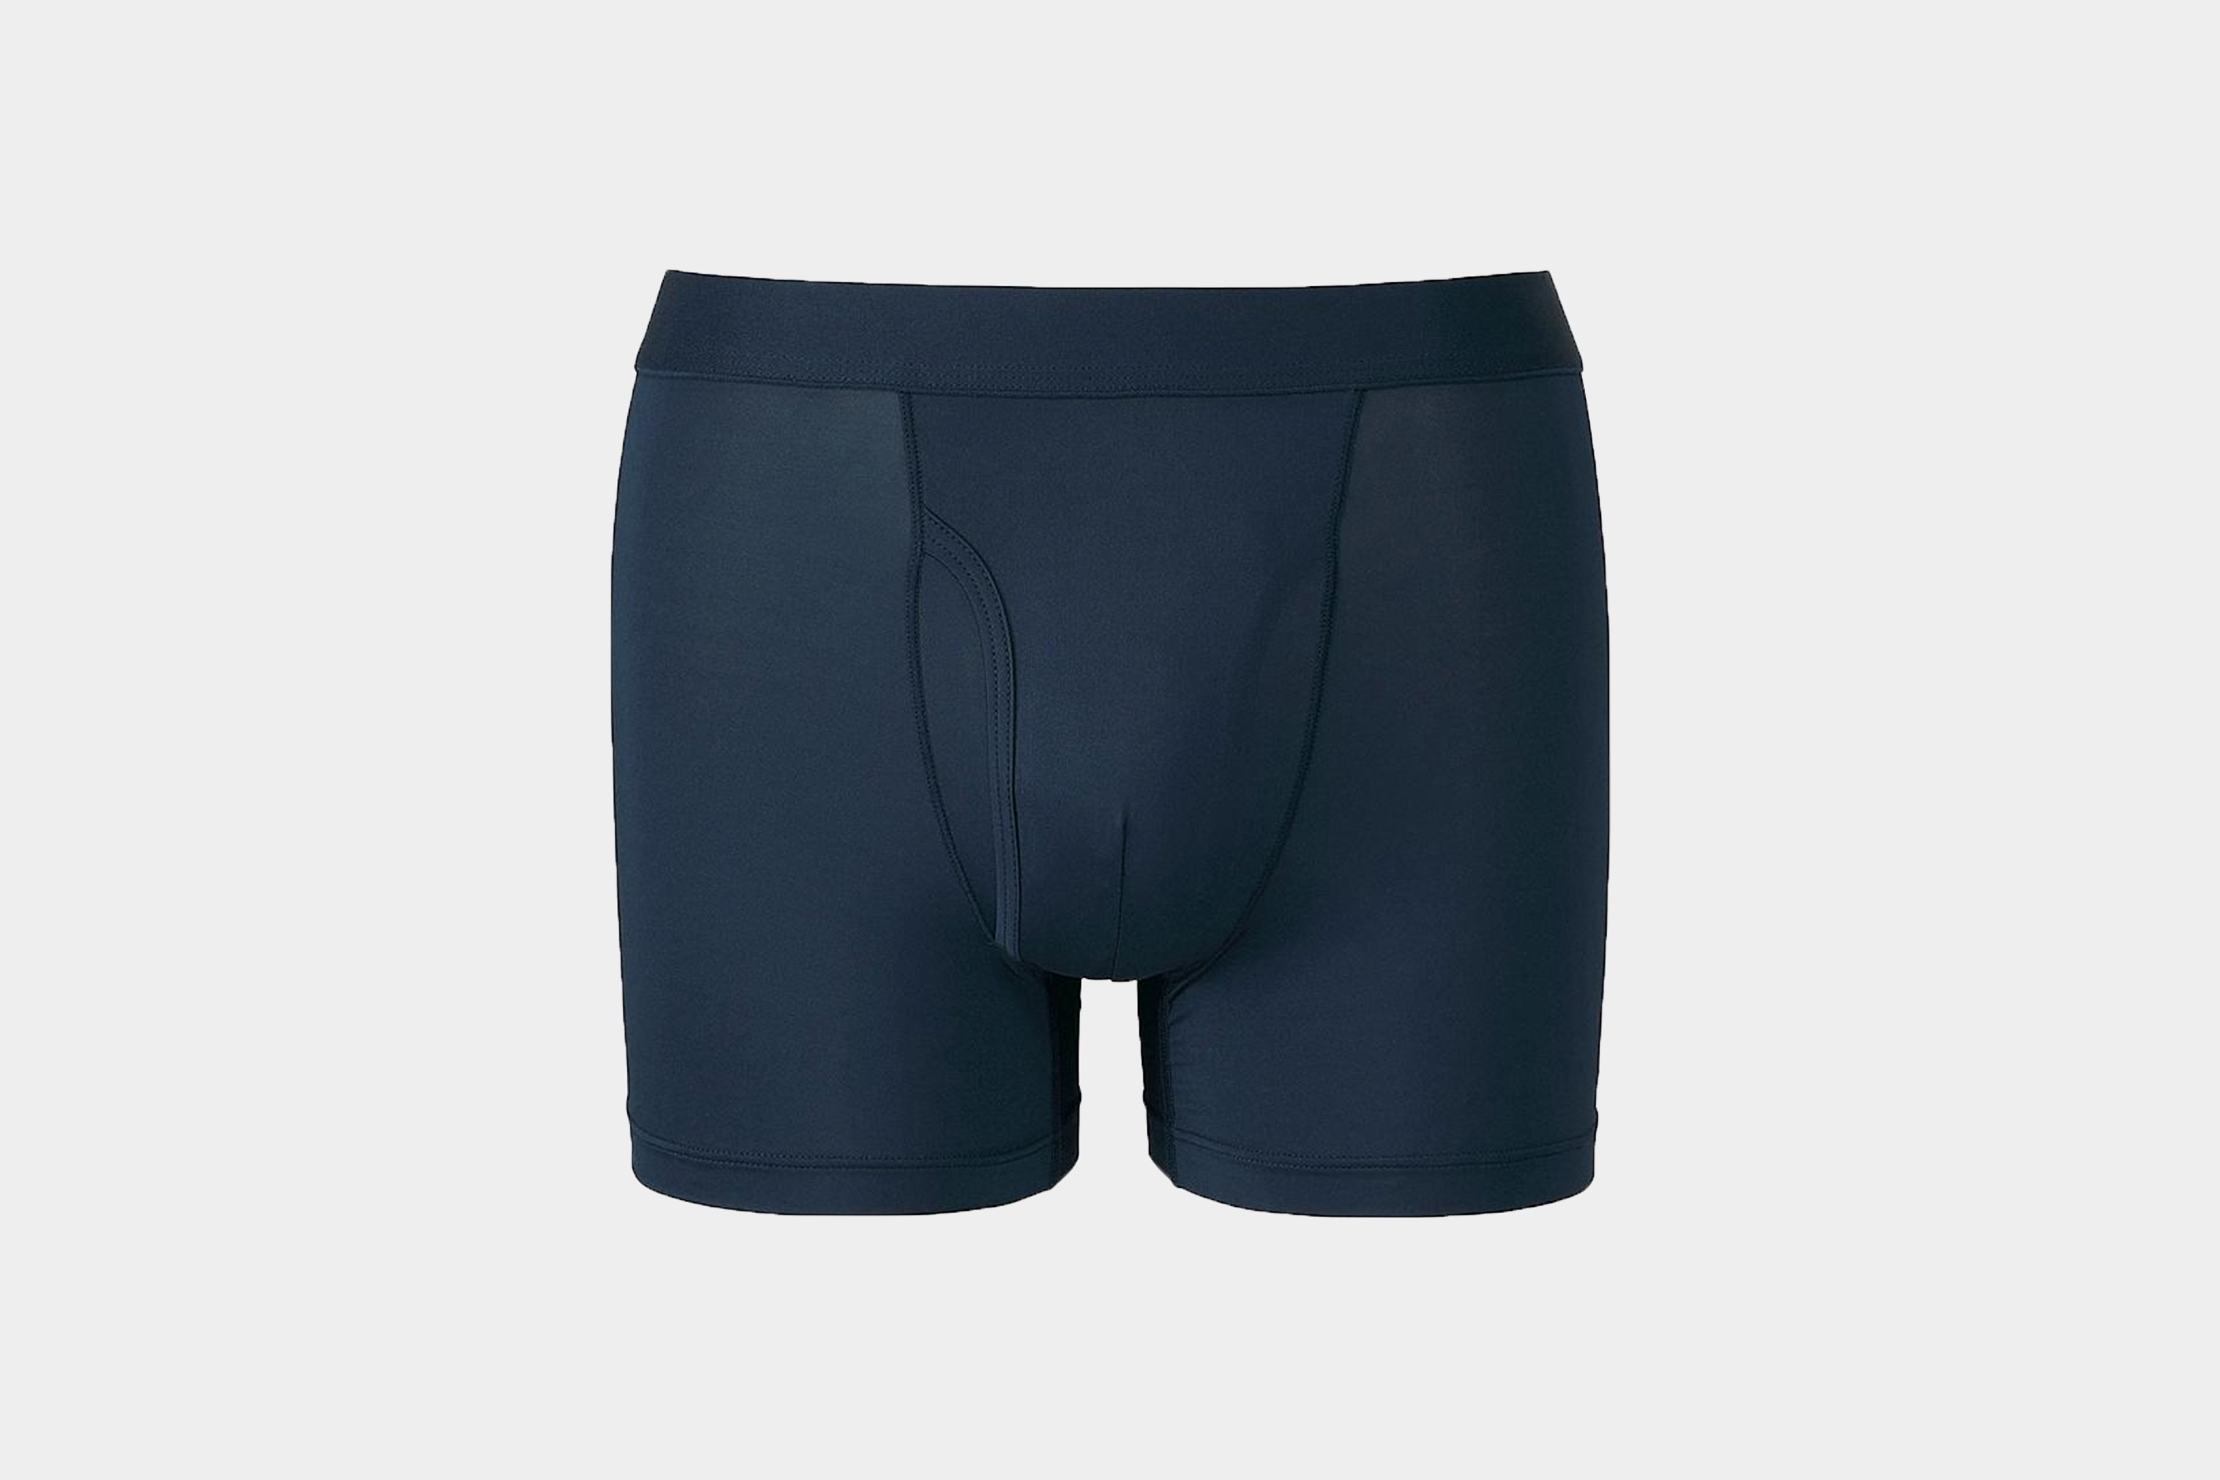 Uniqlo AIRism Stripe Boxer Briefs A – the best products in the Joom Geek  online store